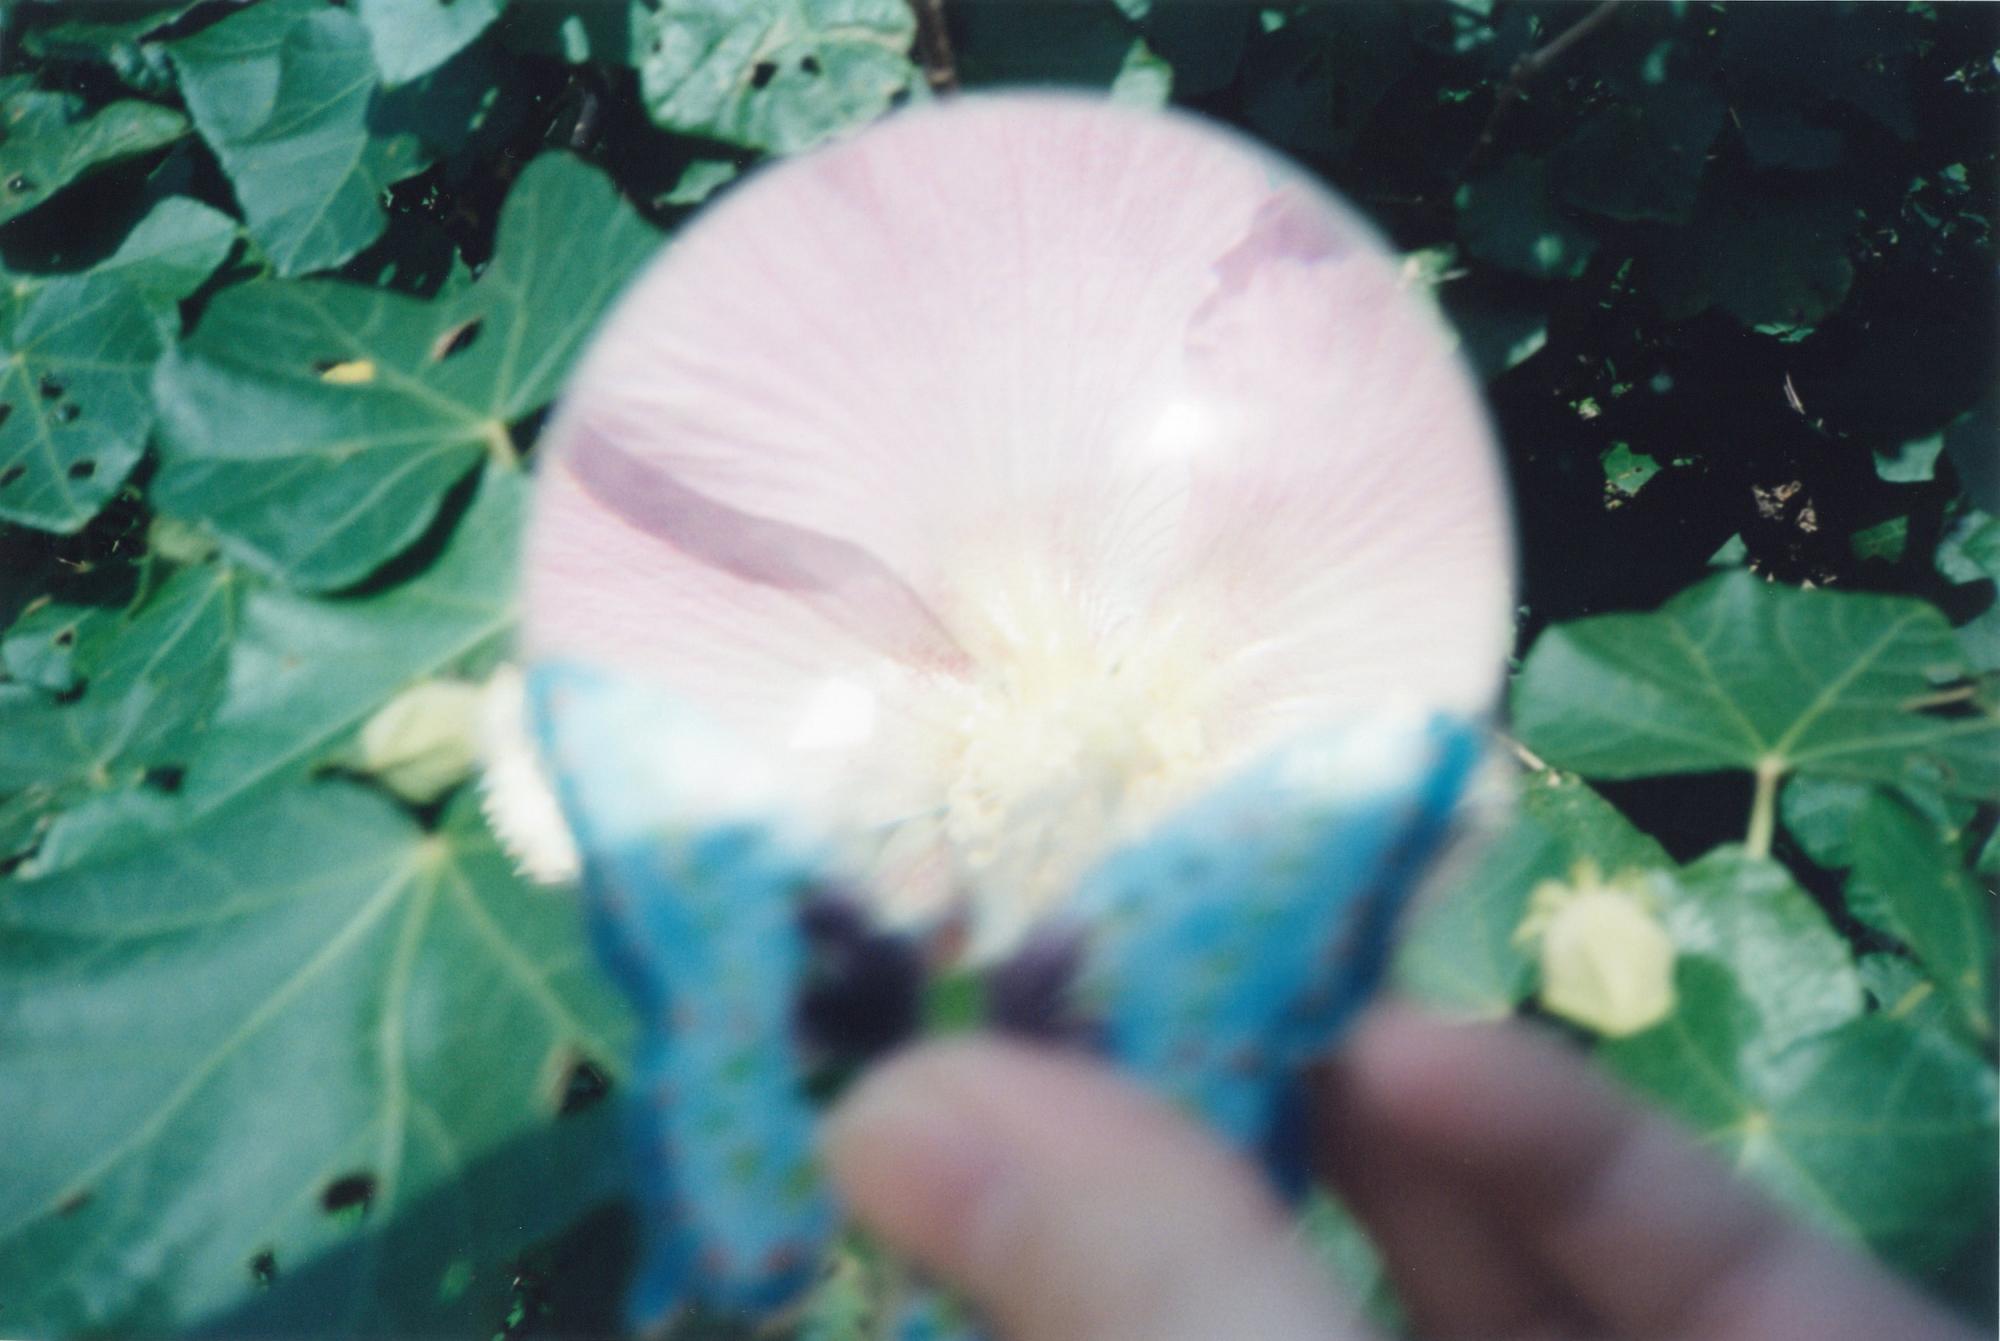 Rinko Kawauchi
Untitled, from the series 'Illuminance', 2009
C-print
Image 19,7 x 29,8 cm (7 3/4 x 11 3/4 in.)
Sheet 25,4 x 30,5 cm (10 x 12 in.)
Frame 26,5 x 31,5 x 2,5 cm ( 10 3/8 x 12 3/8 x 1 in.)
Edition of 6 (#1/6)

Reminiscent of Japanese